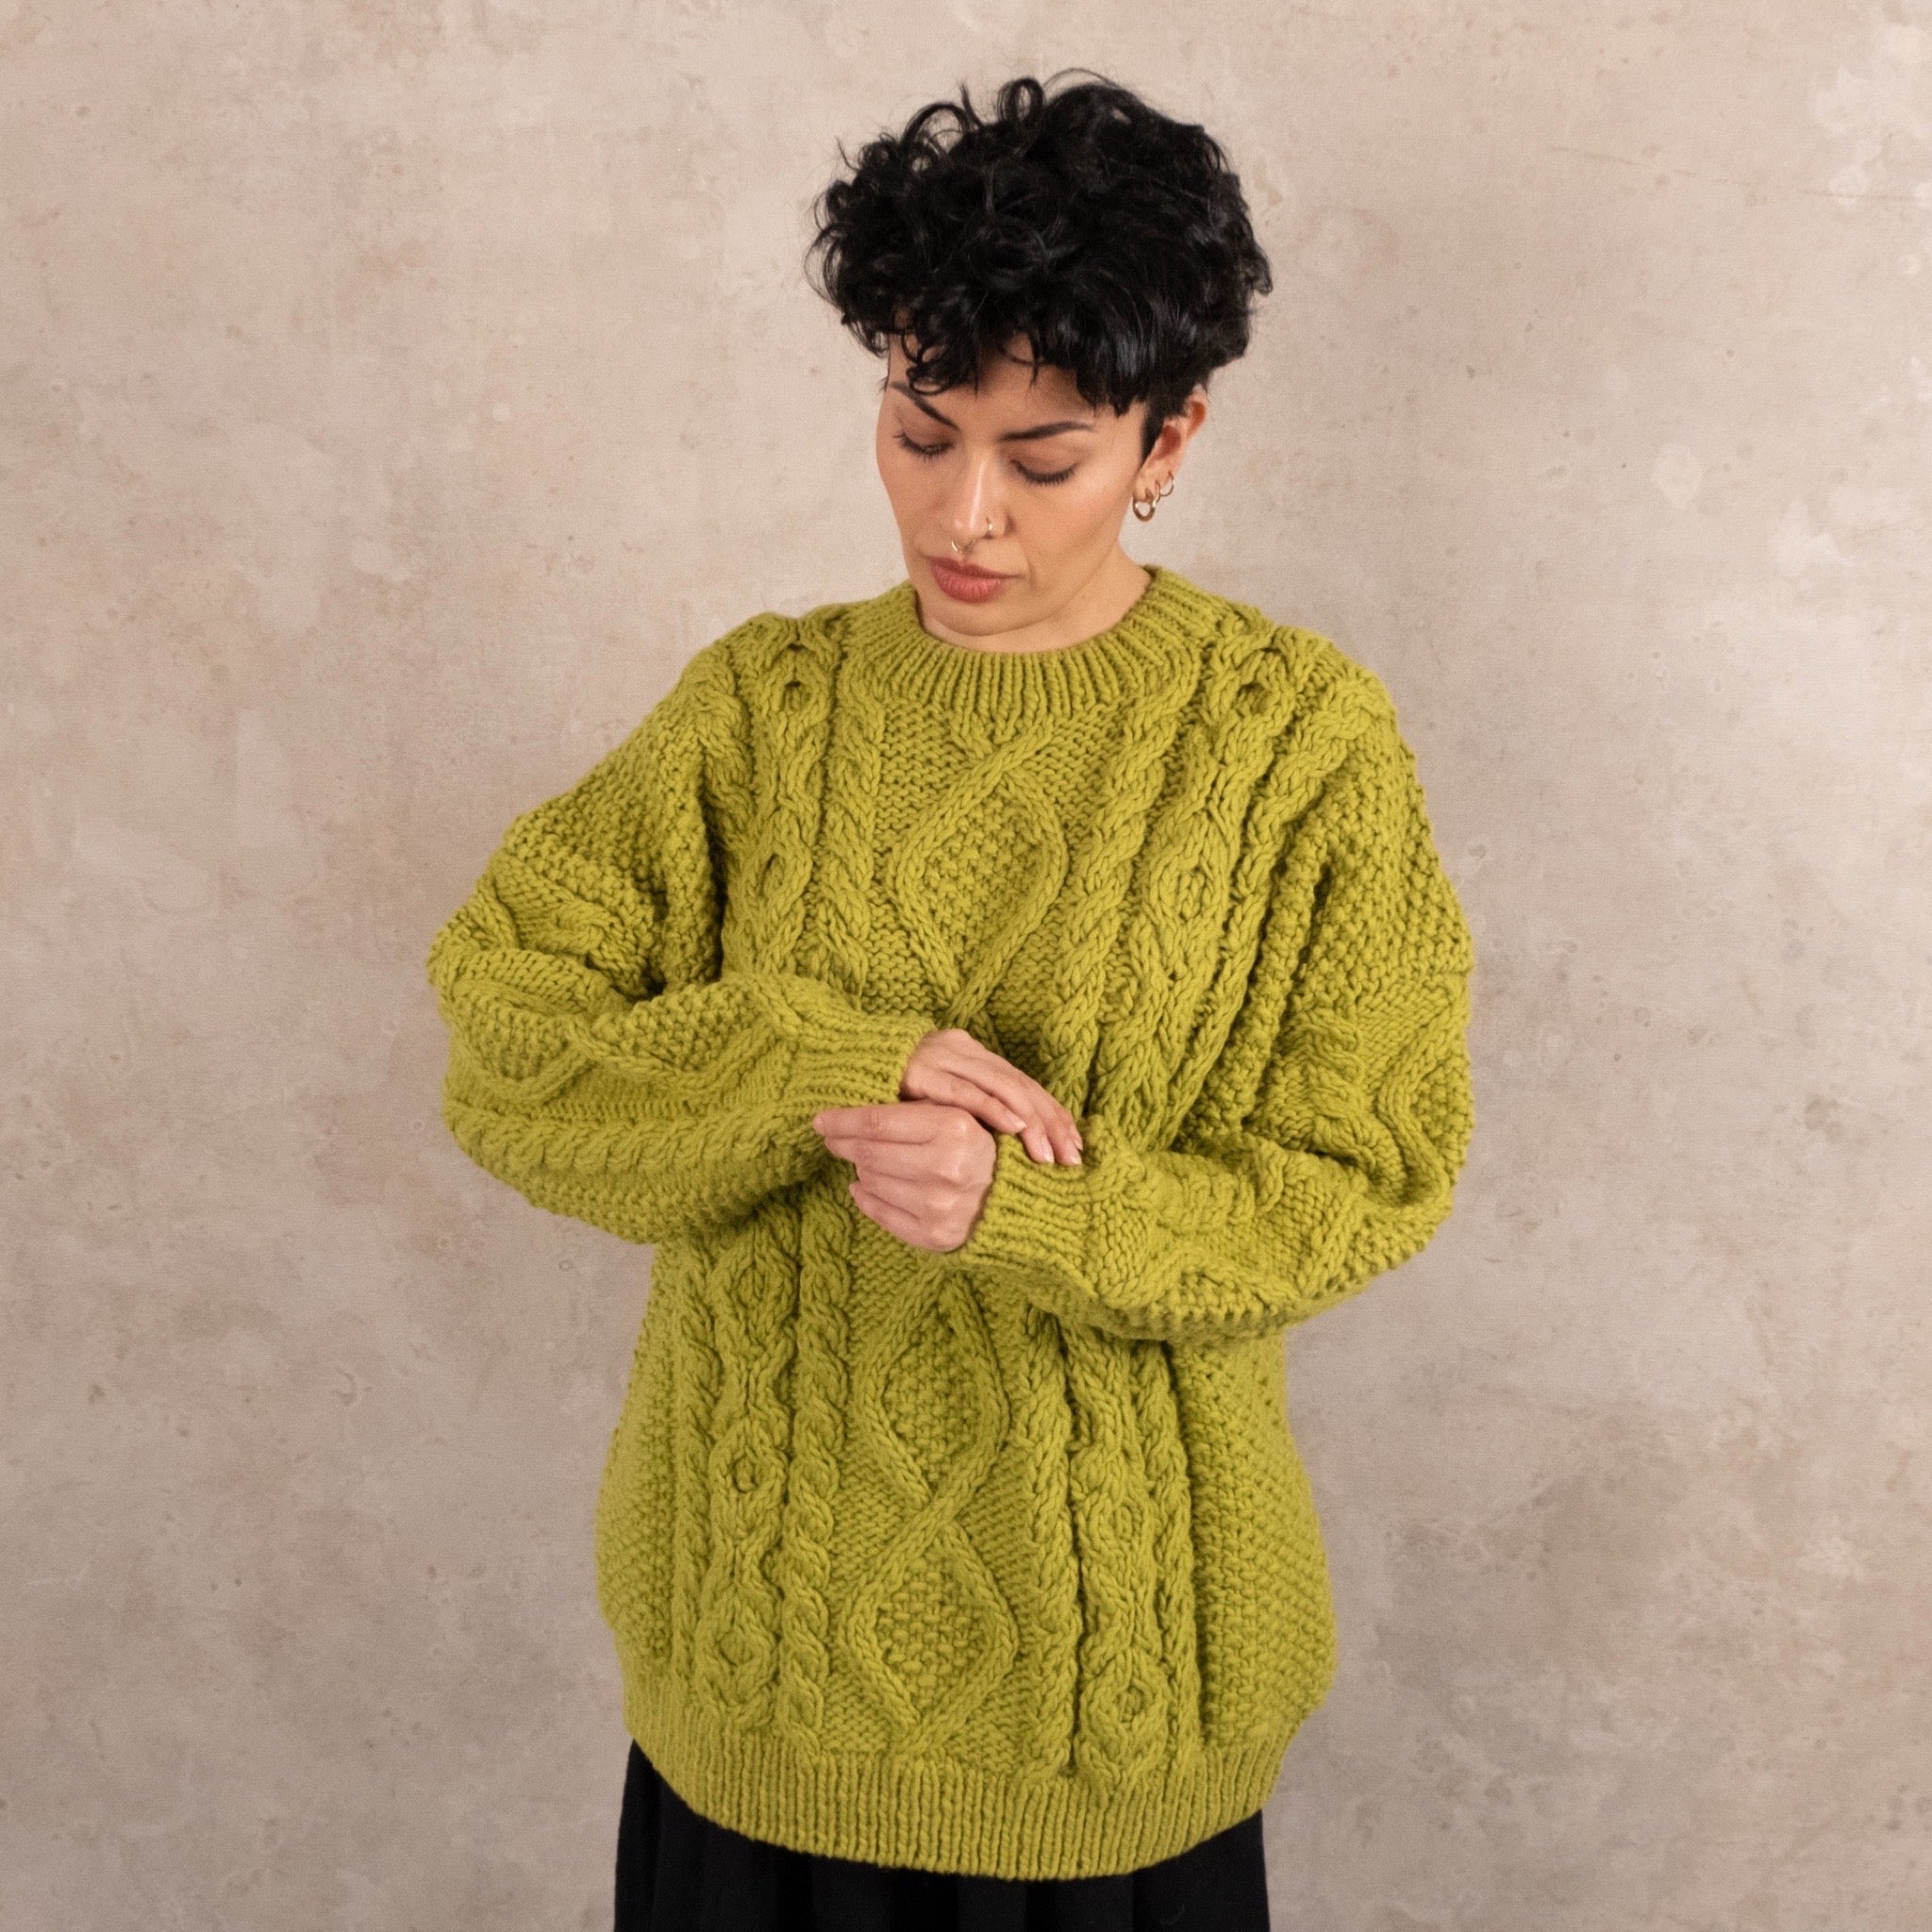 Ichi Antiquités Peruvian Hand Knitted Pistachio Cable Wool Sweater